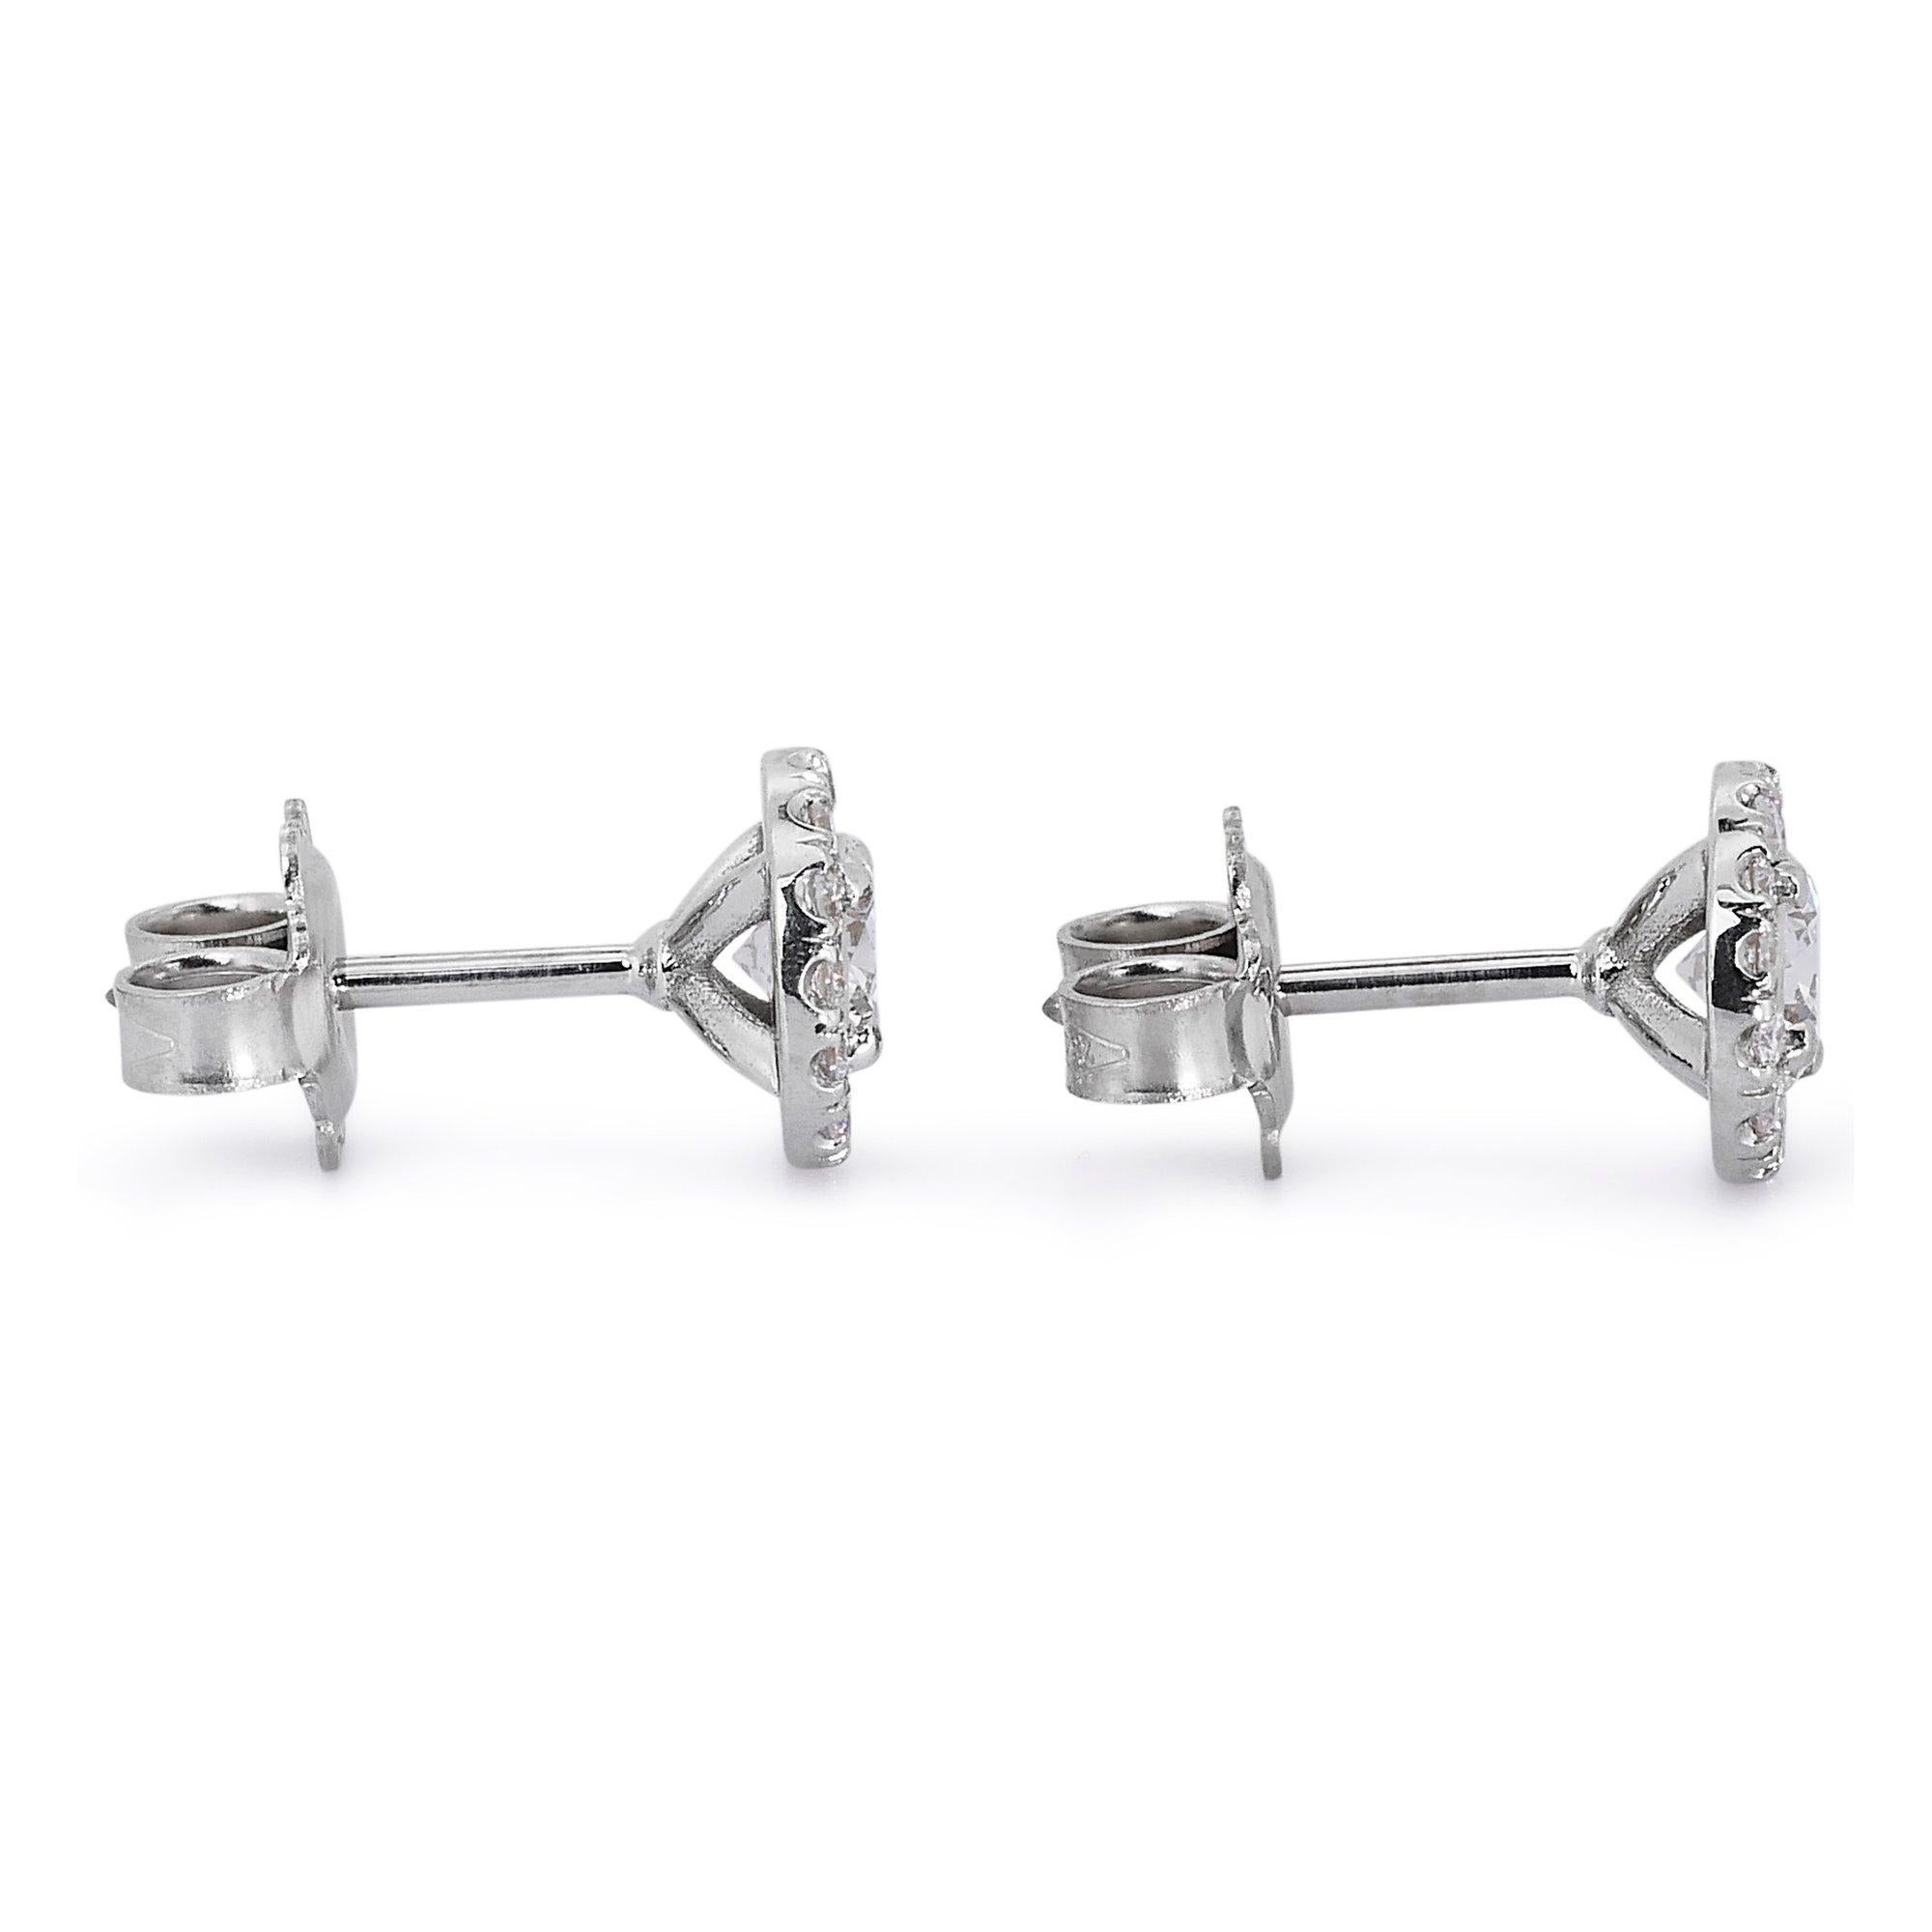 Luxurious 1.24ct Round Diamond Stud Earrings in 18K White Gold - GIA Certified For Sale 1